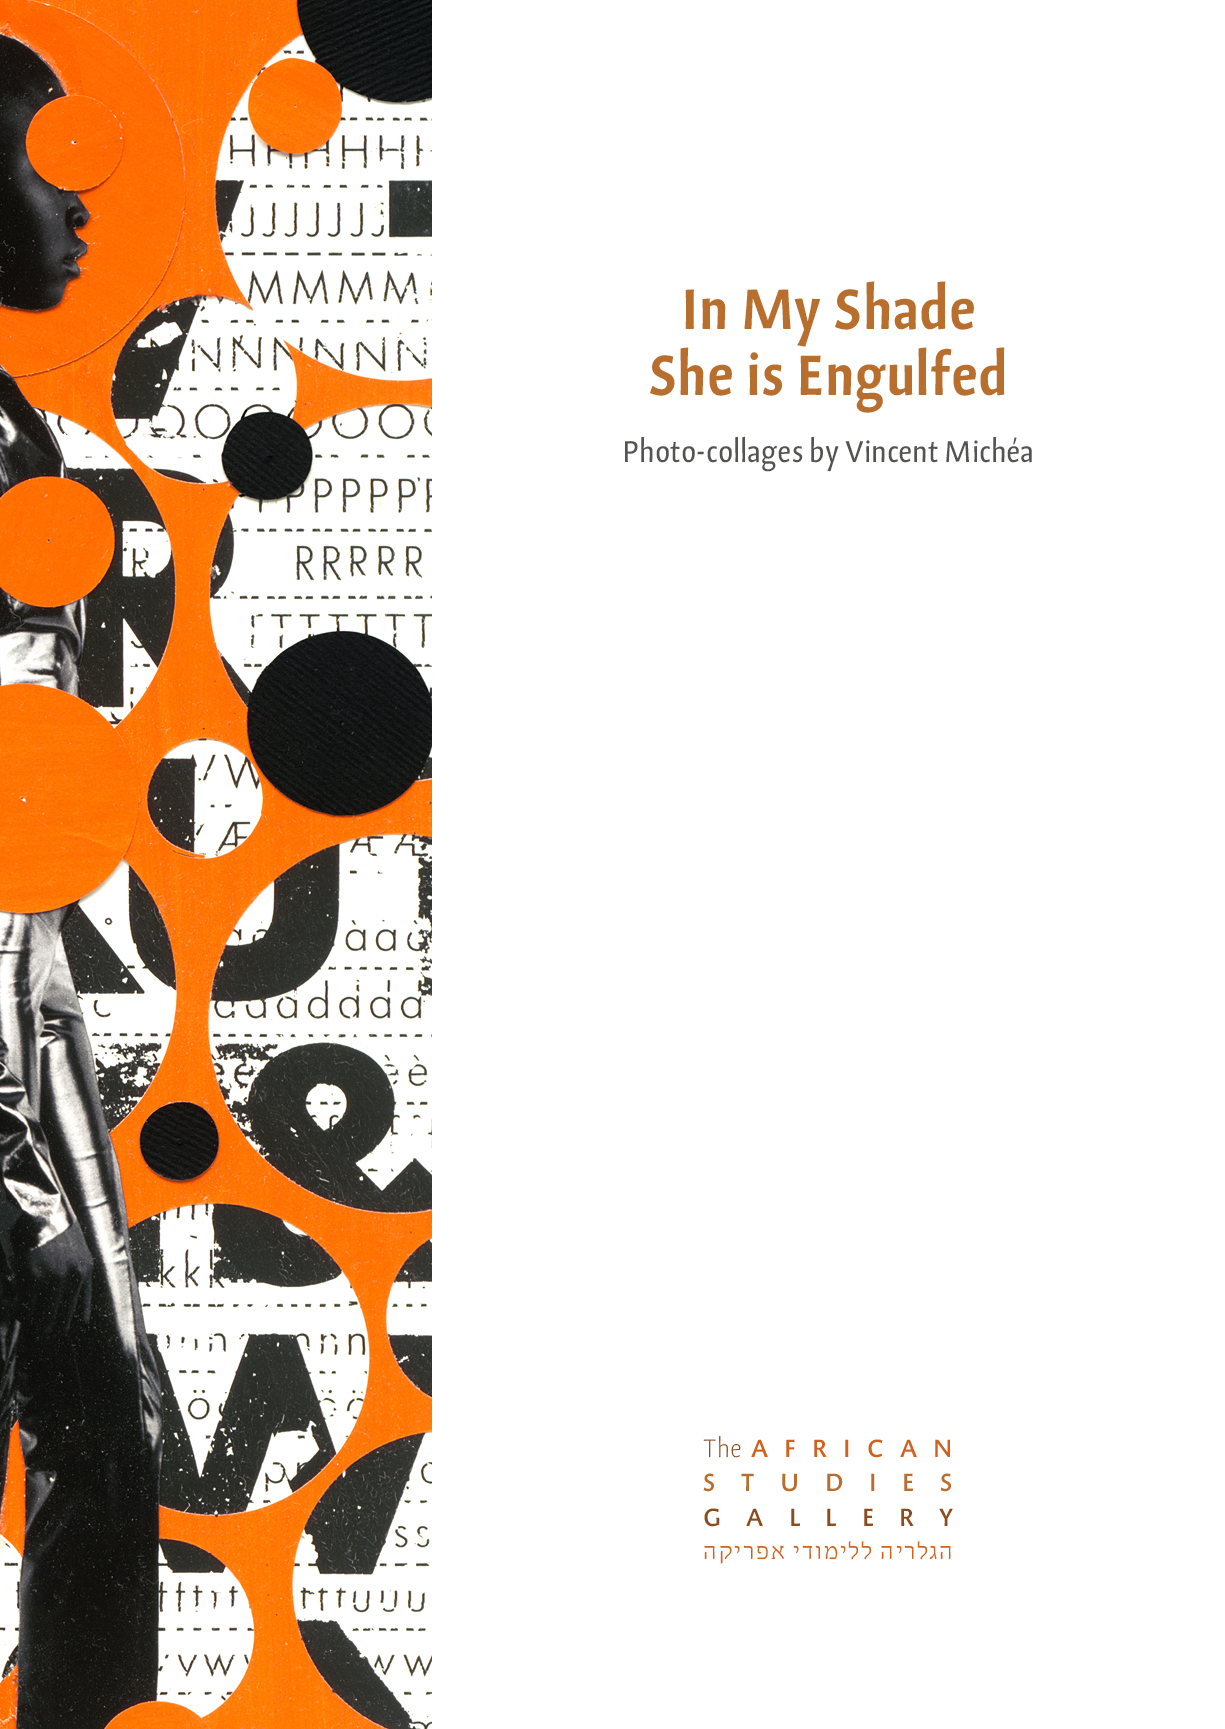 https://www.africanstudiesgallery.org/catalogues/09-in-my-shade.pdf